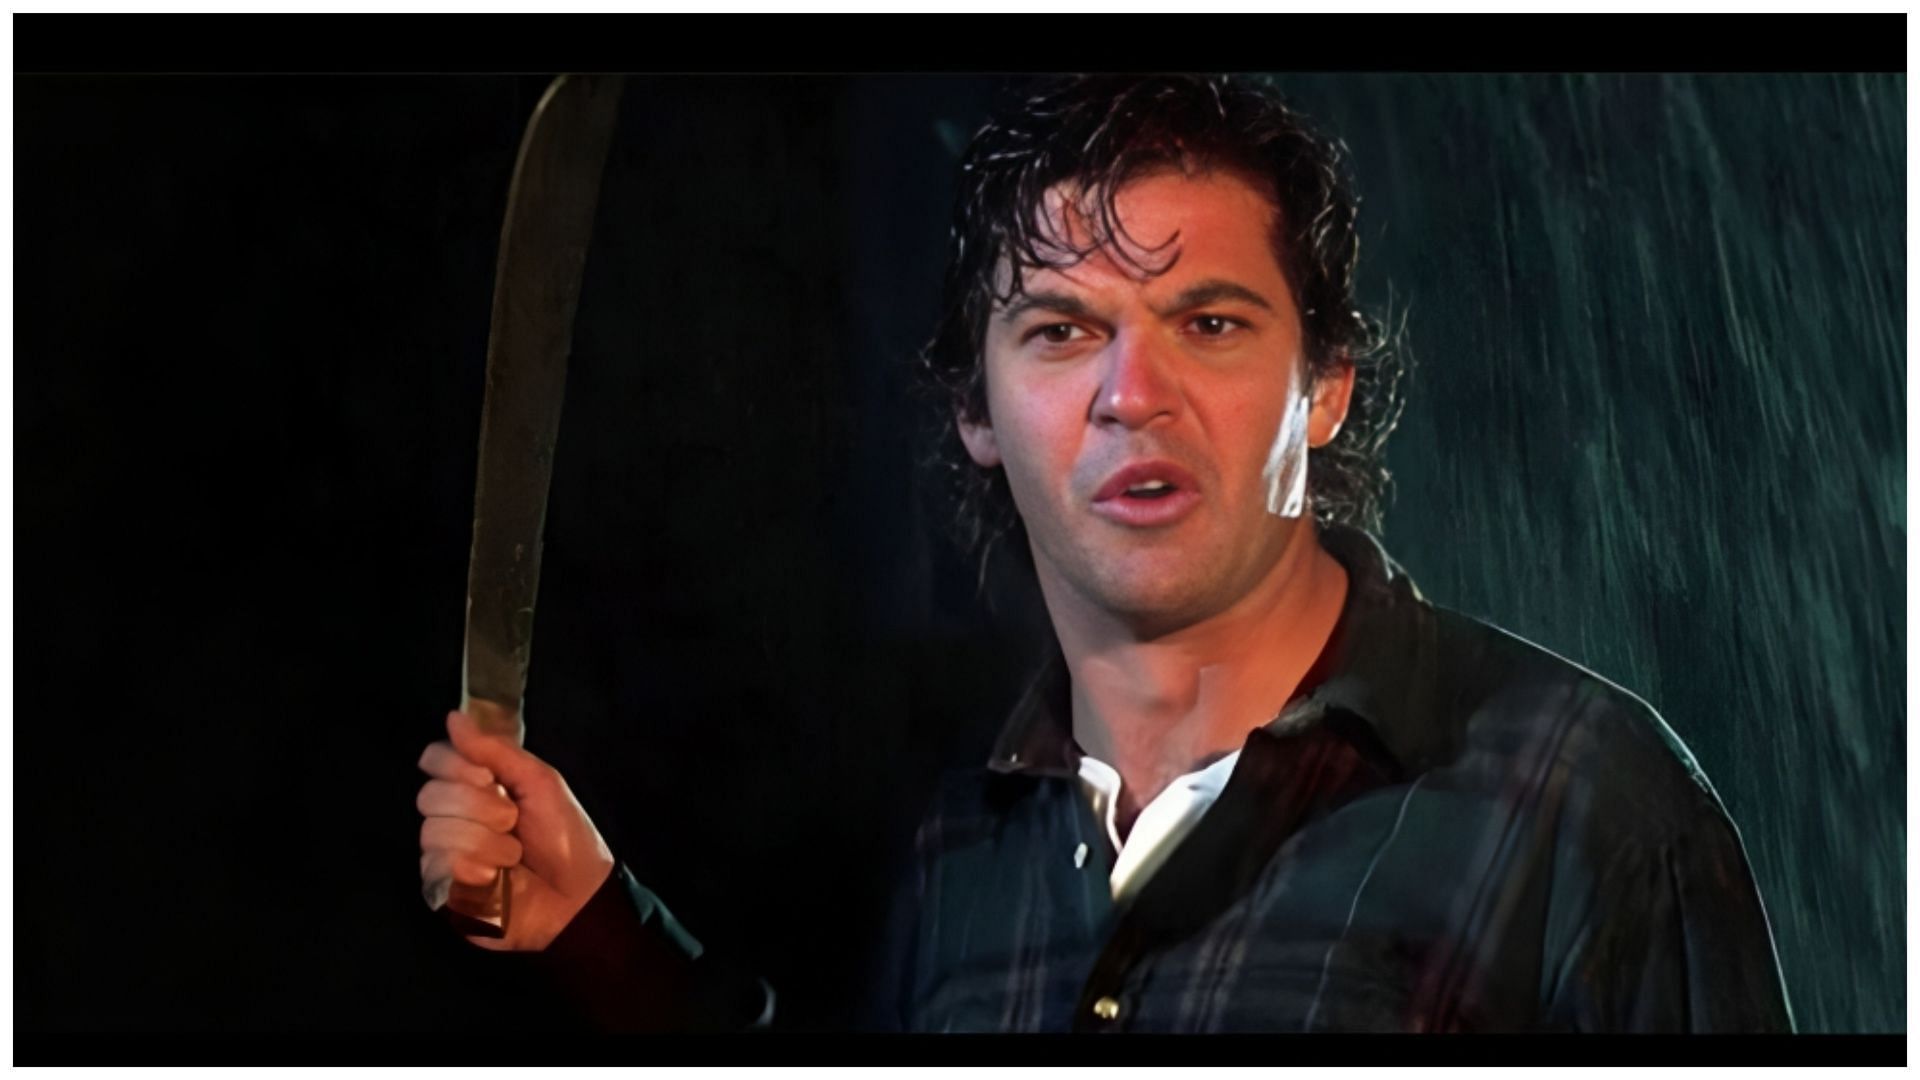 Friday the 13th actor Erich Anderson died of cancer (Image via YouTube / Scotty McCoy)